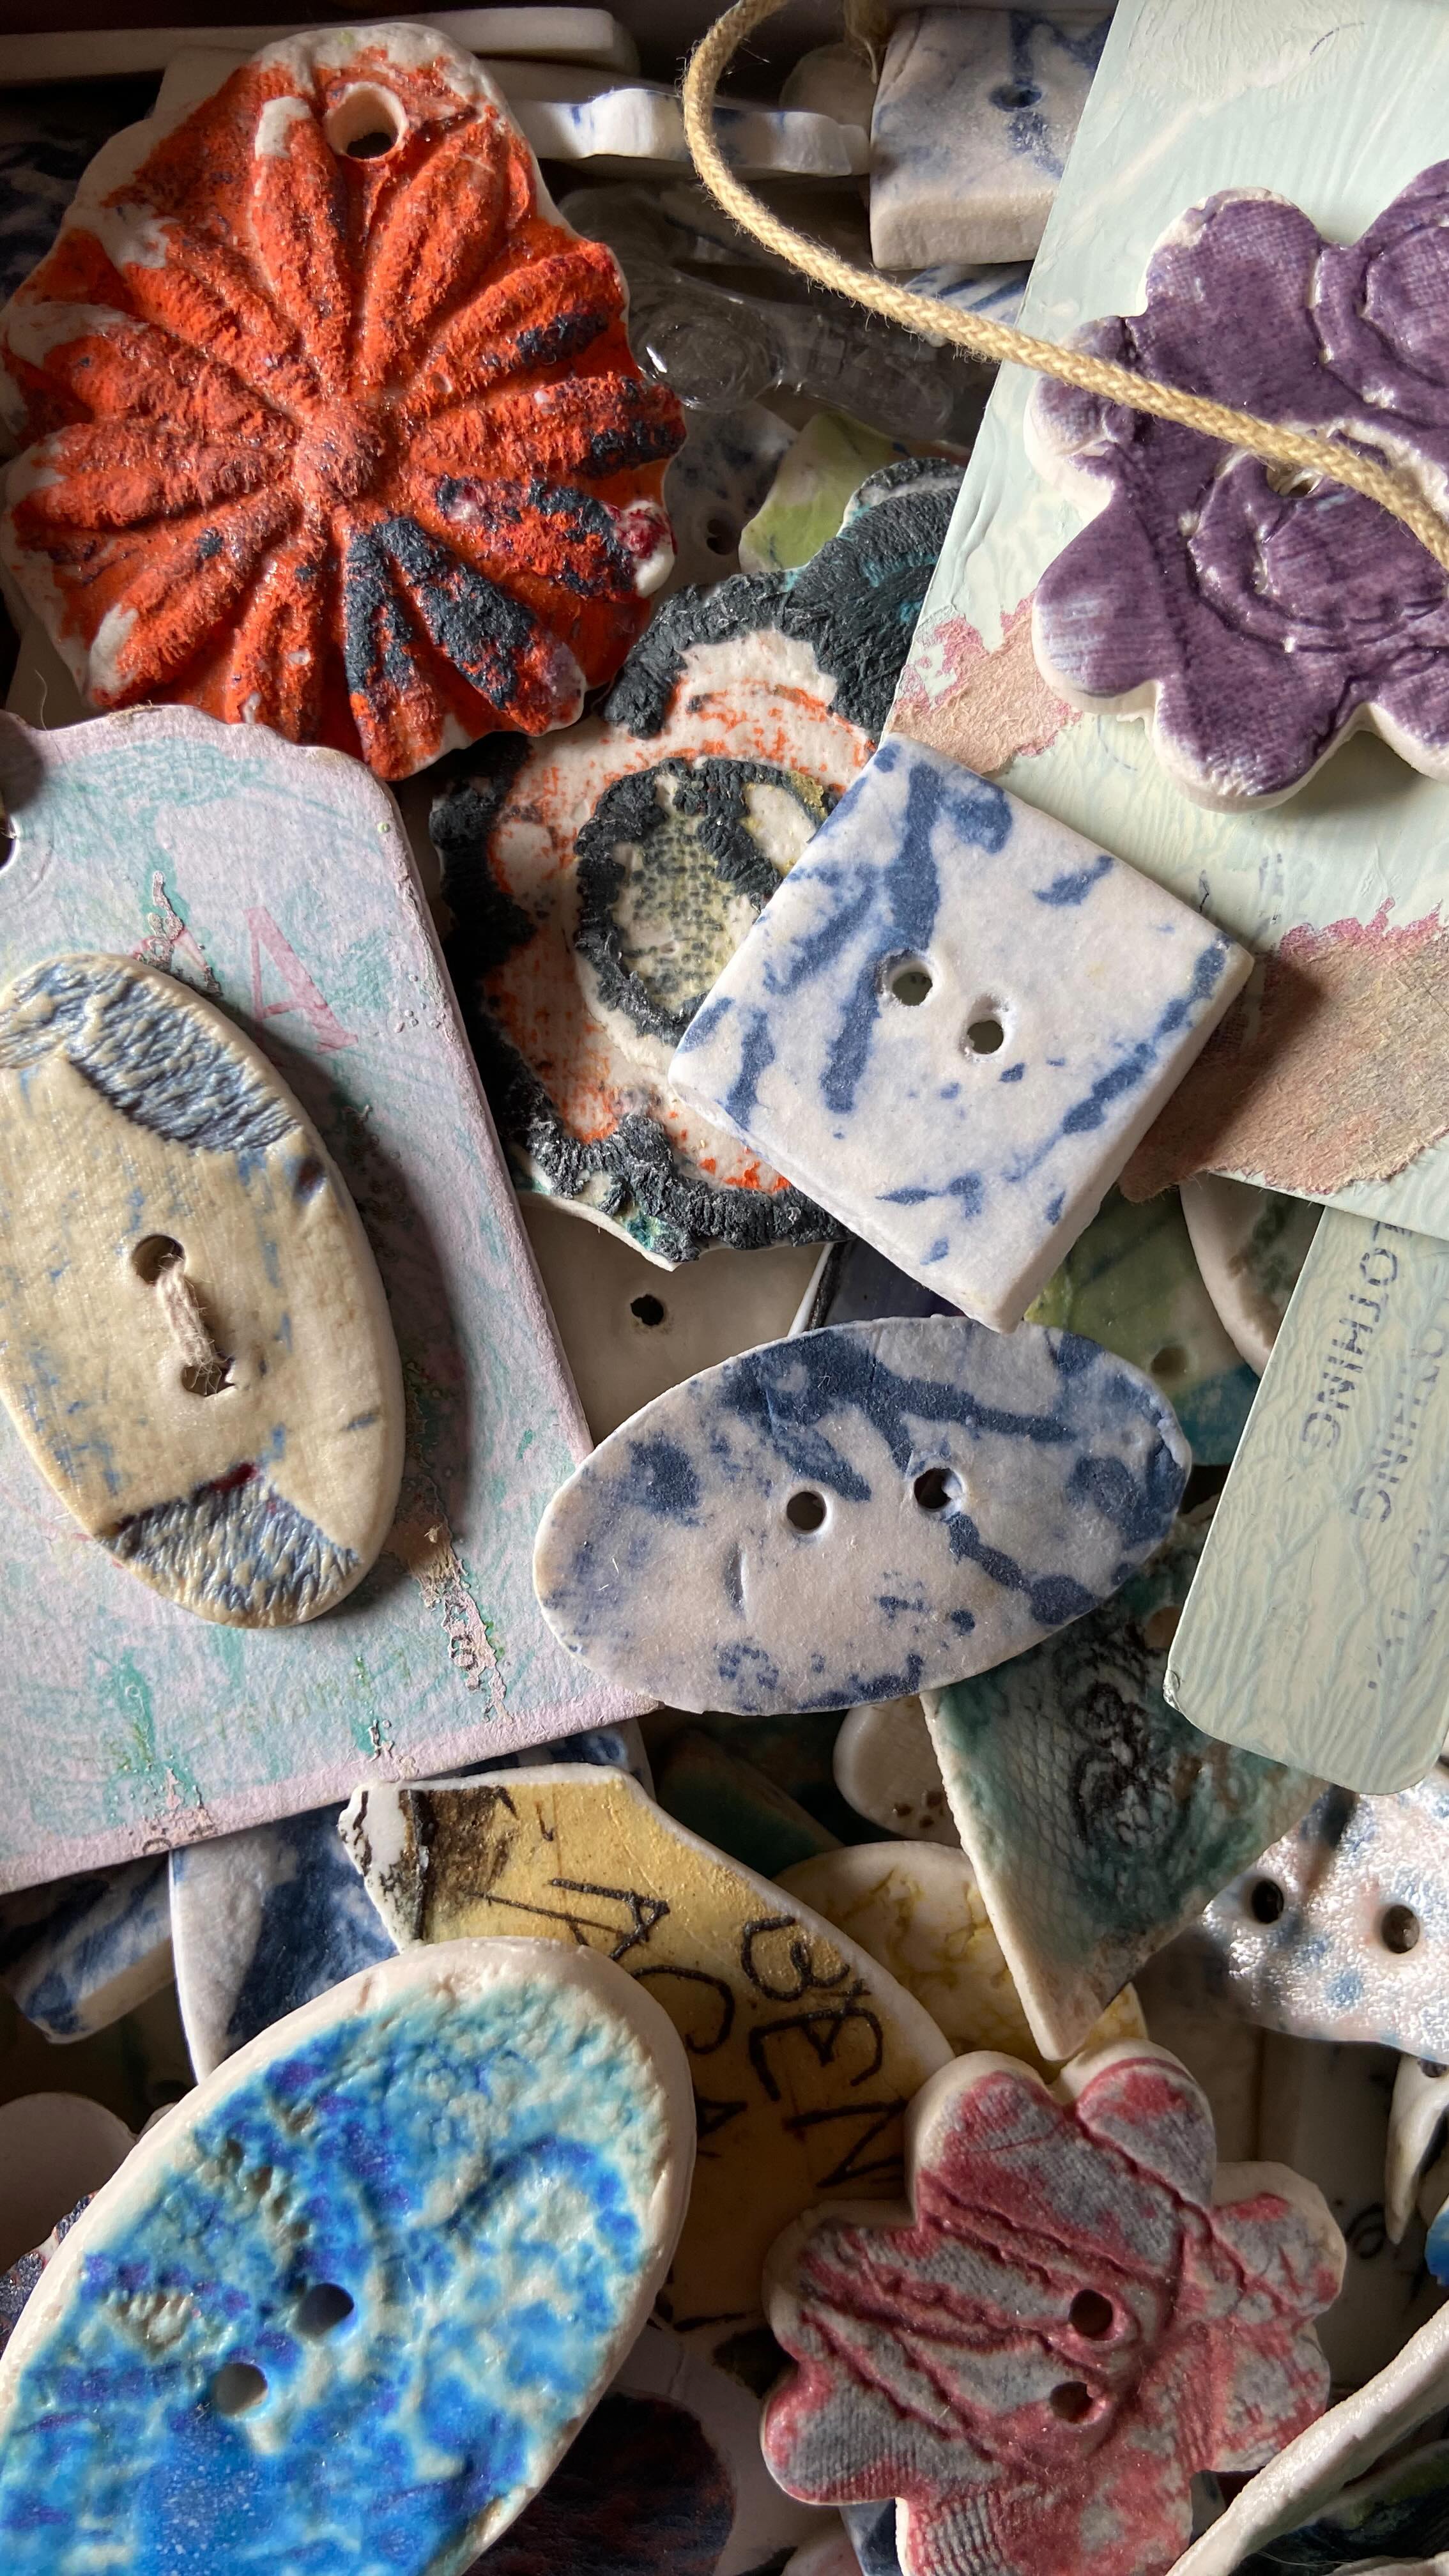 Ceramic button making workshop ….. firing yet to take place ! It’s always nice to have a button collection! Who grew up with a family button tin ? Check out link for workshops coming up - it’s such a treat to have a day out to perhaps try something new …. We all deserve some timeout 🙂 
-
-
-
-
 #ceramic #buttons #ceramicdesign #paperclay #porcelain #workshops #studiolife #metime #timeout #cakeandcoffee #creativespace #soulgrowth